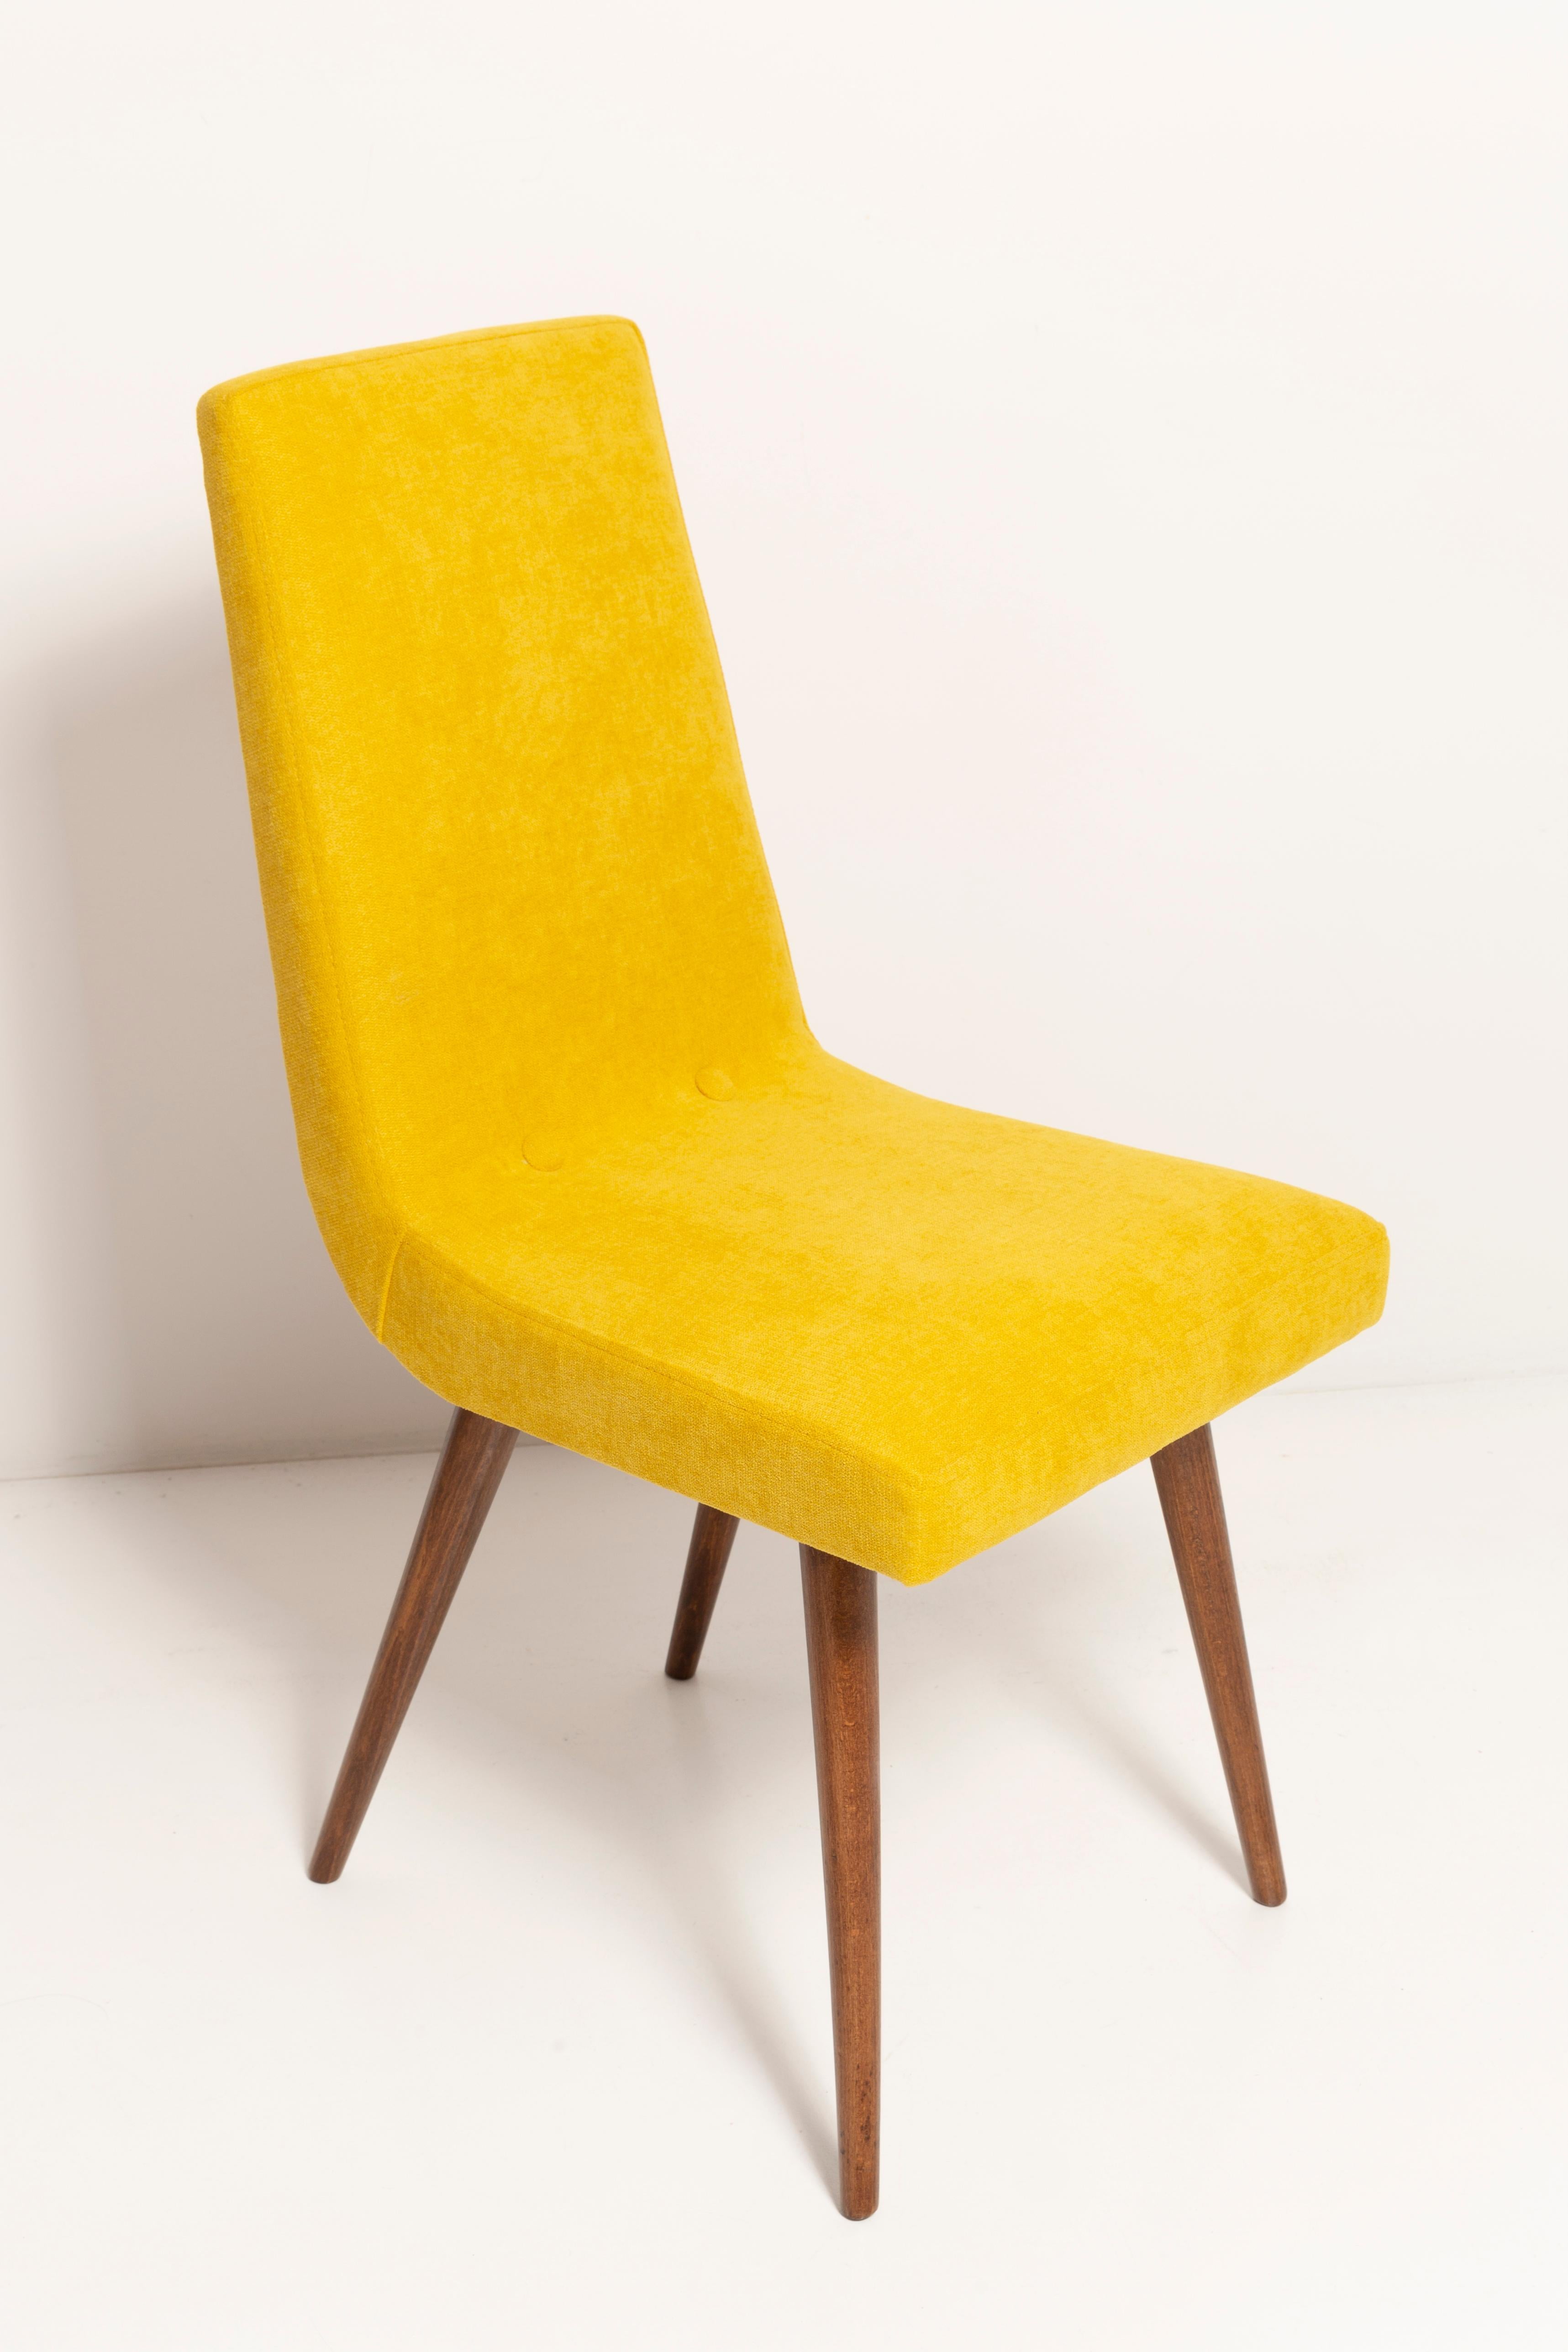 Chair designed by Prof. Rajmund Halas. Have been made of beechwood. The chair is after complete upholstery renovation, the woodwork has been cleaned and refreshed. We used matte varnish. Seat and back was dressed in a mustard yellow, durable and